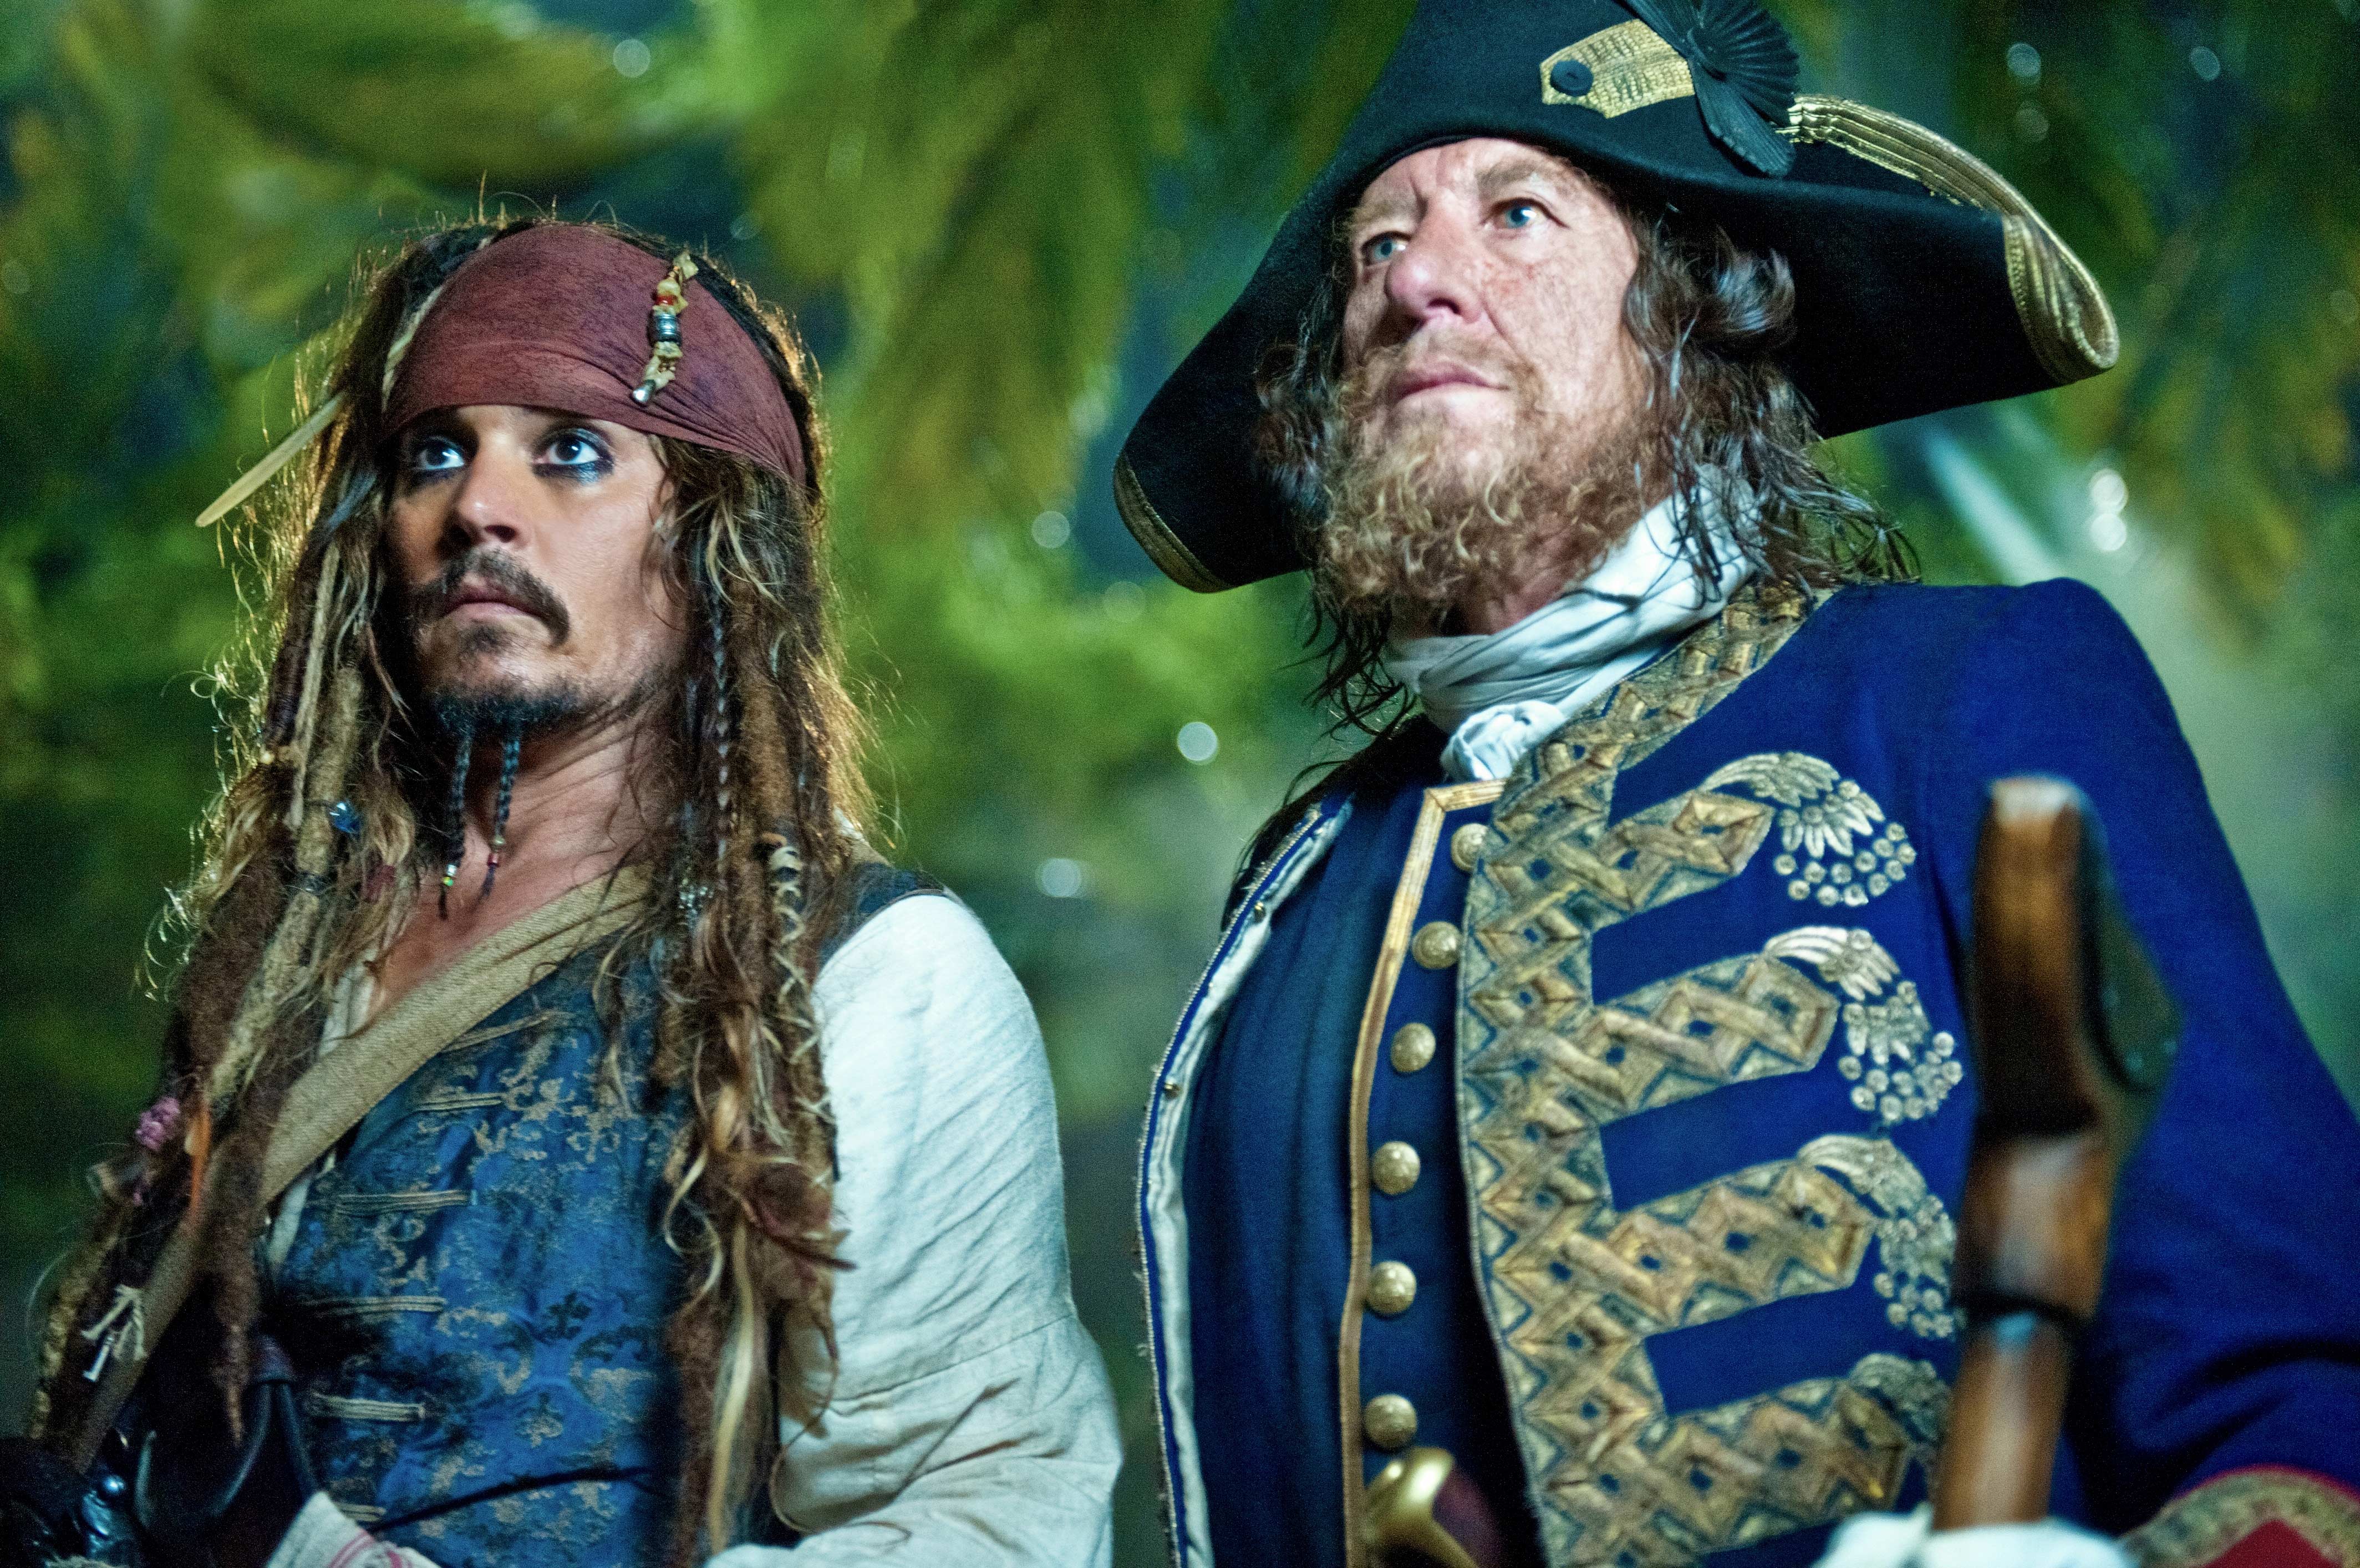 Jack Sparrow And Barbossa From Pirates Of The Caribbean Desktop